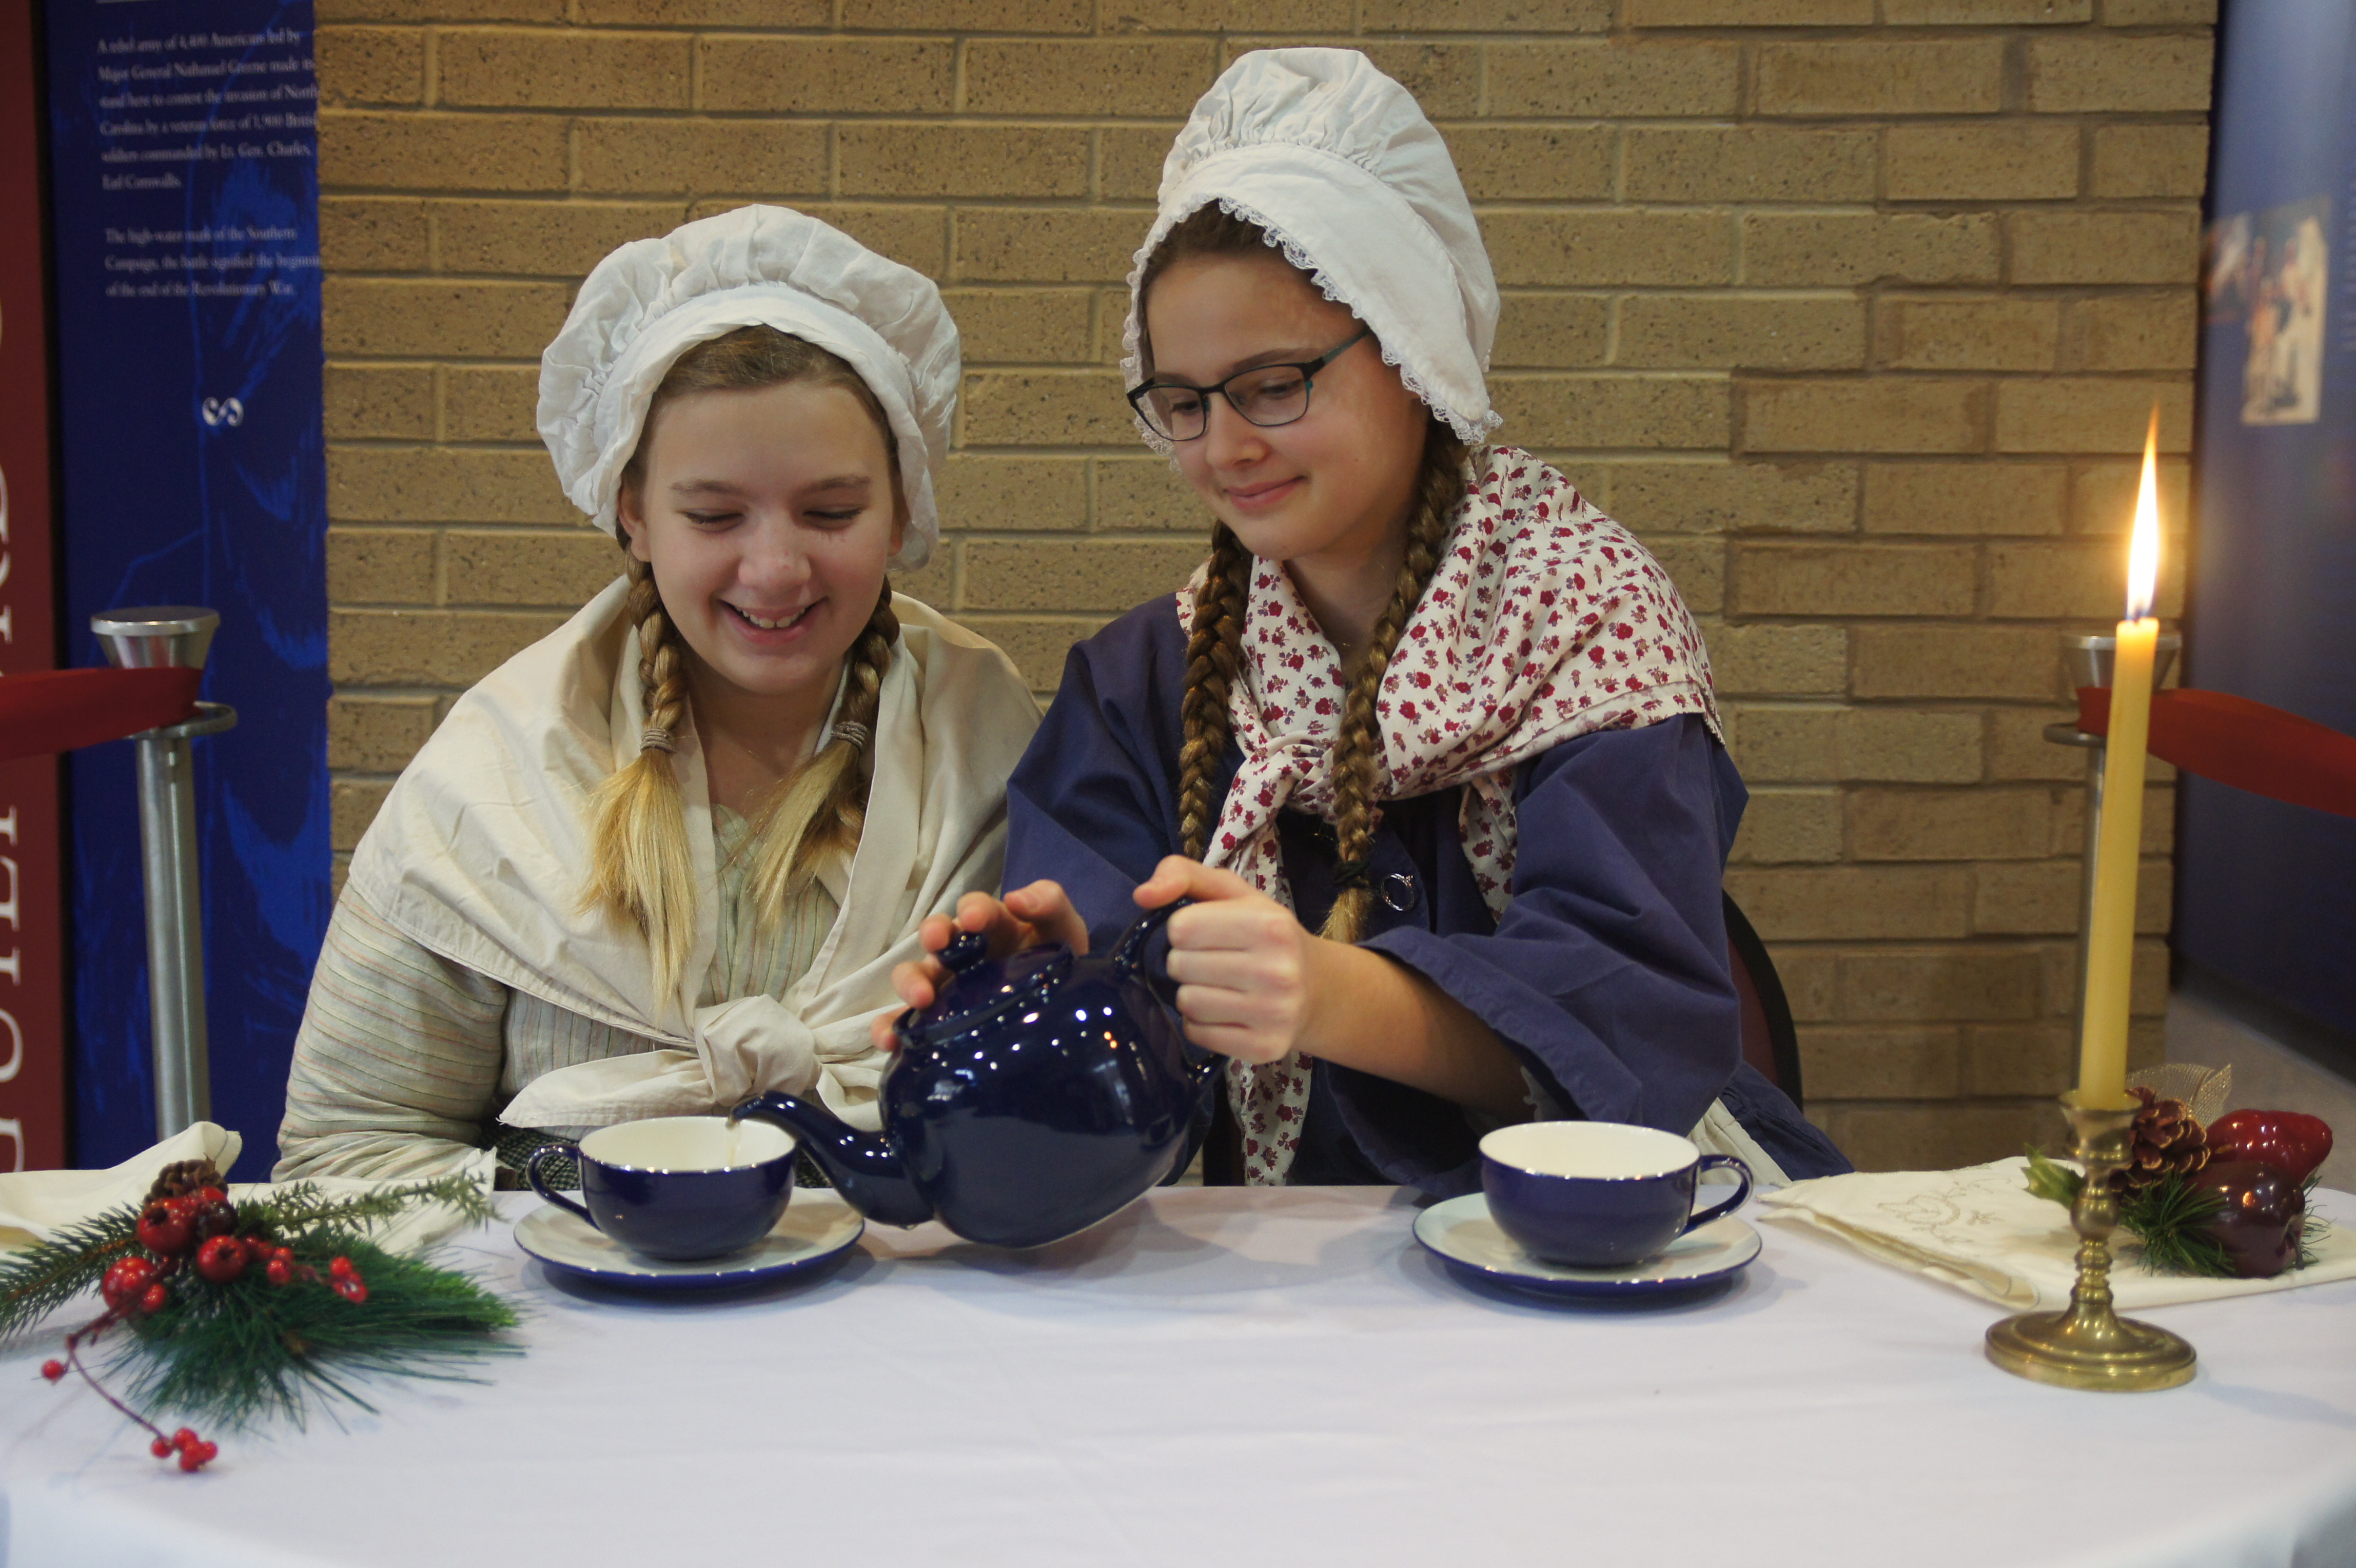 Two girls in colonial clothing pour tea out of a blue teapot